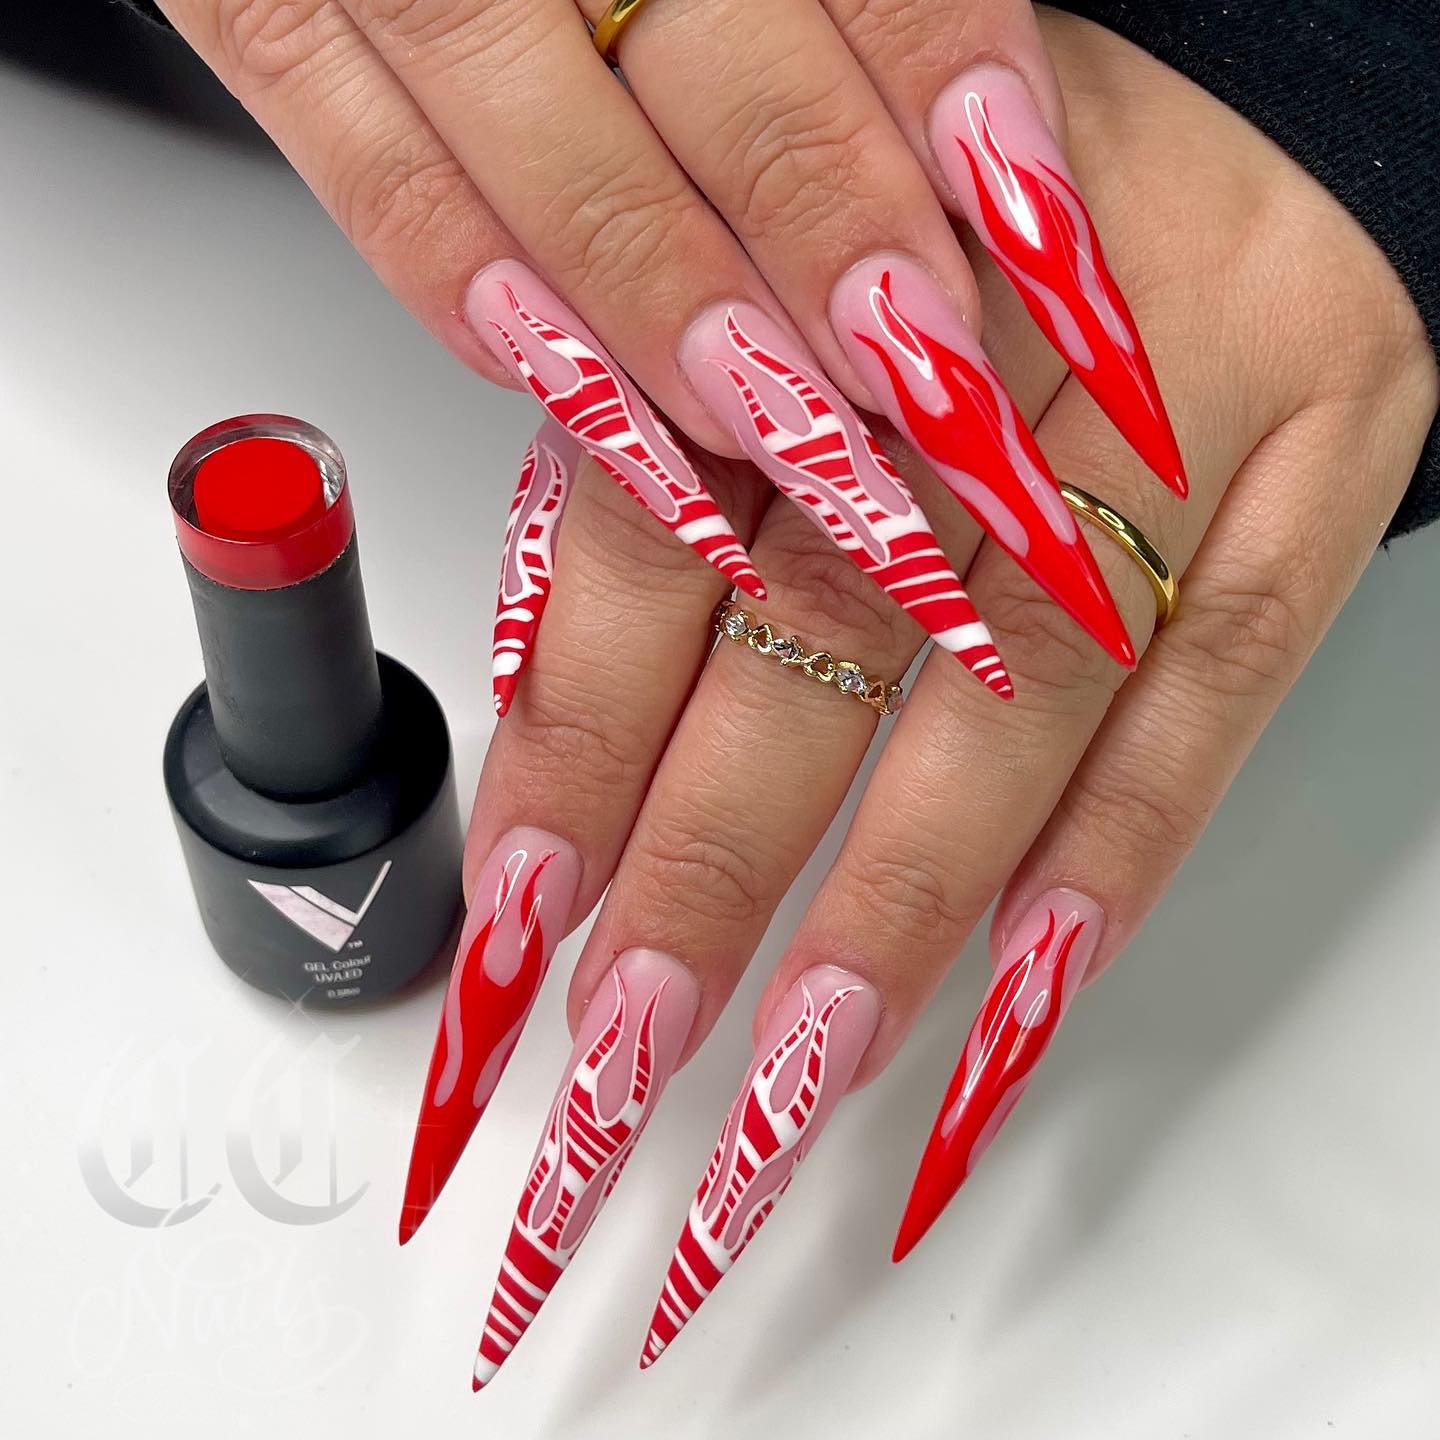 Those who have long nail claws are super cool and it is hard to imagine how it feels like having these nails for some people. To amaze the others, you can do more. Red flames will do that for you.